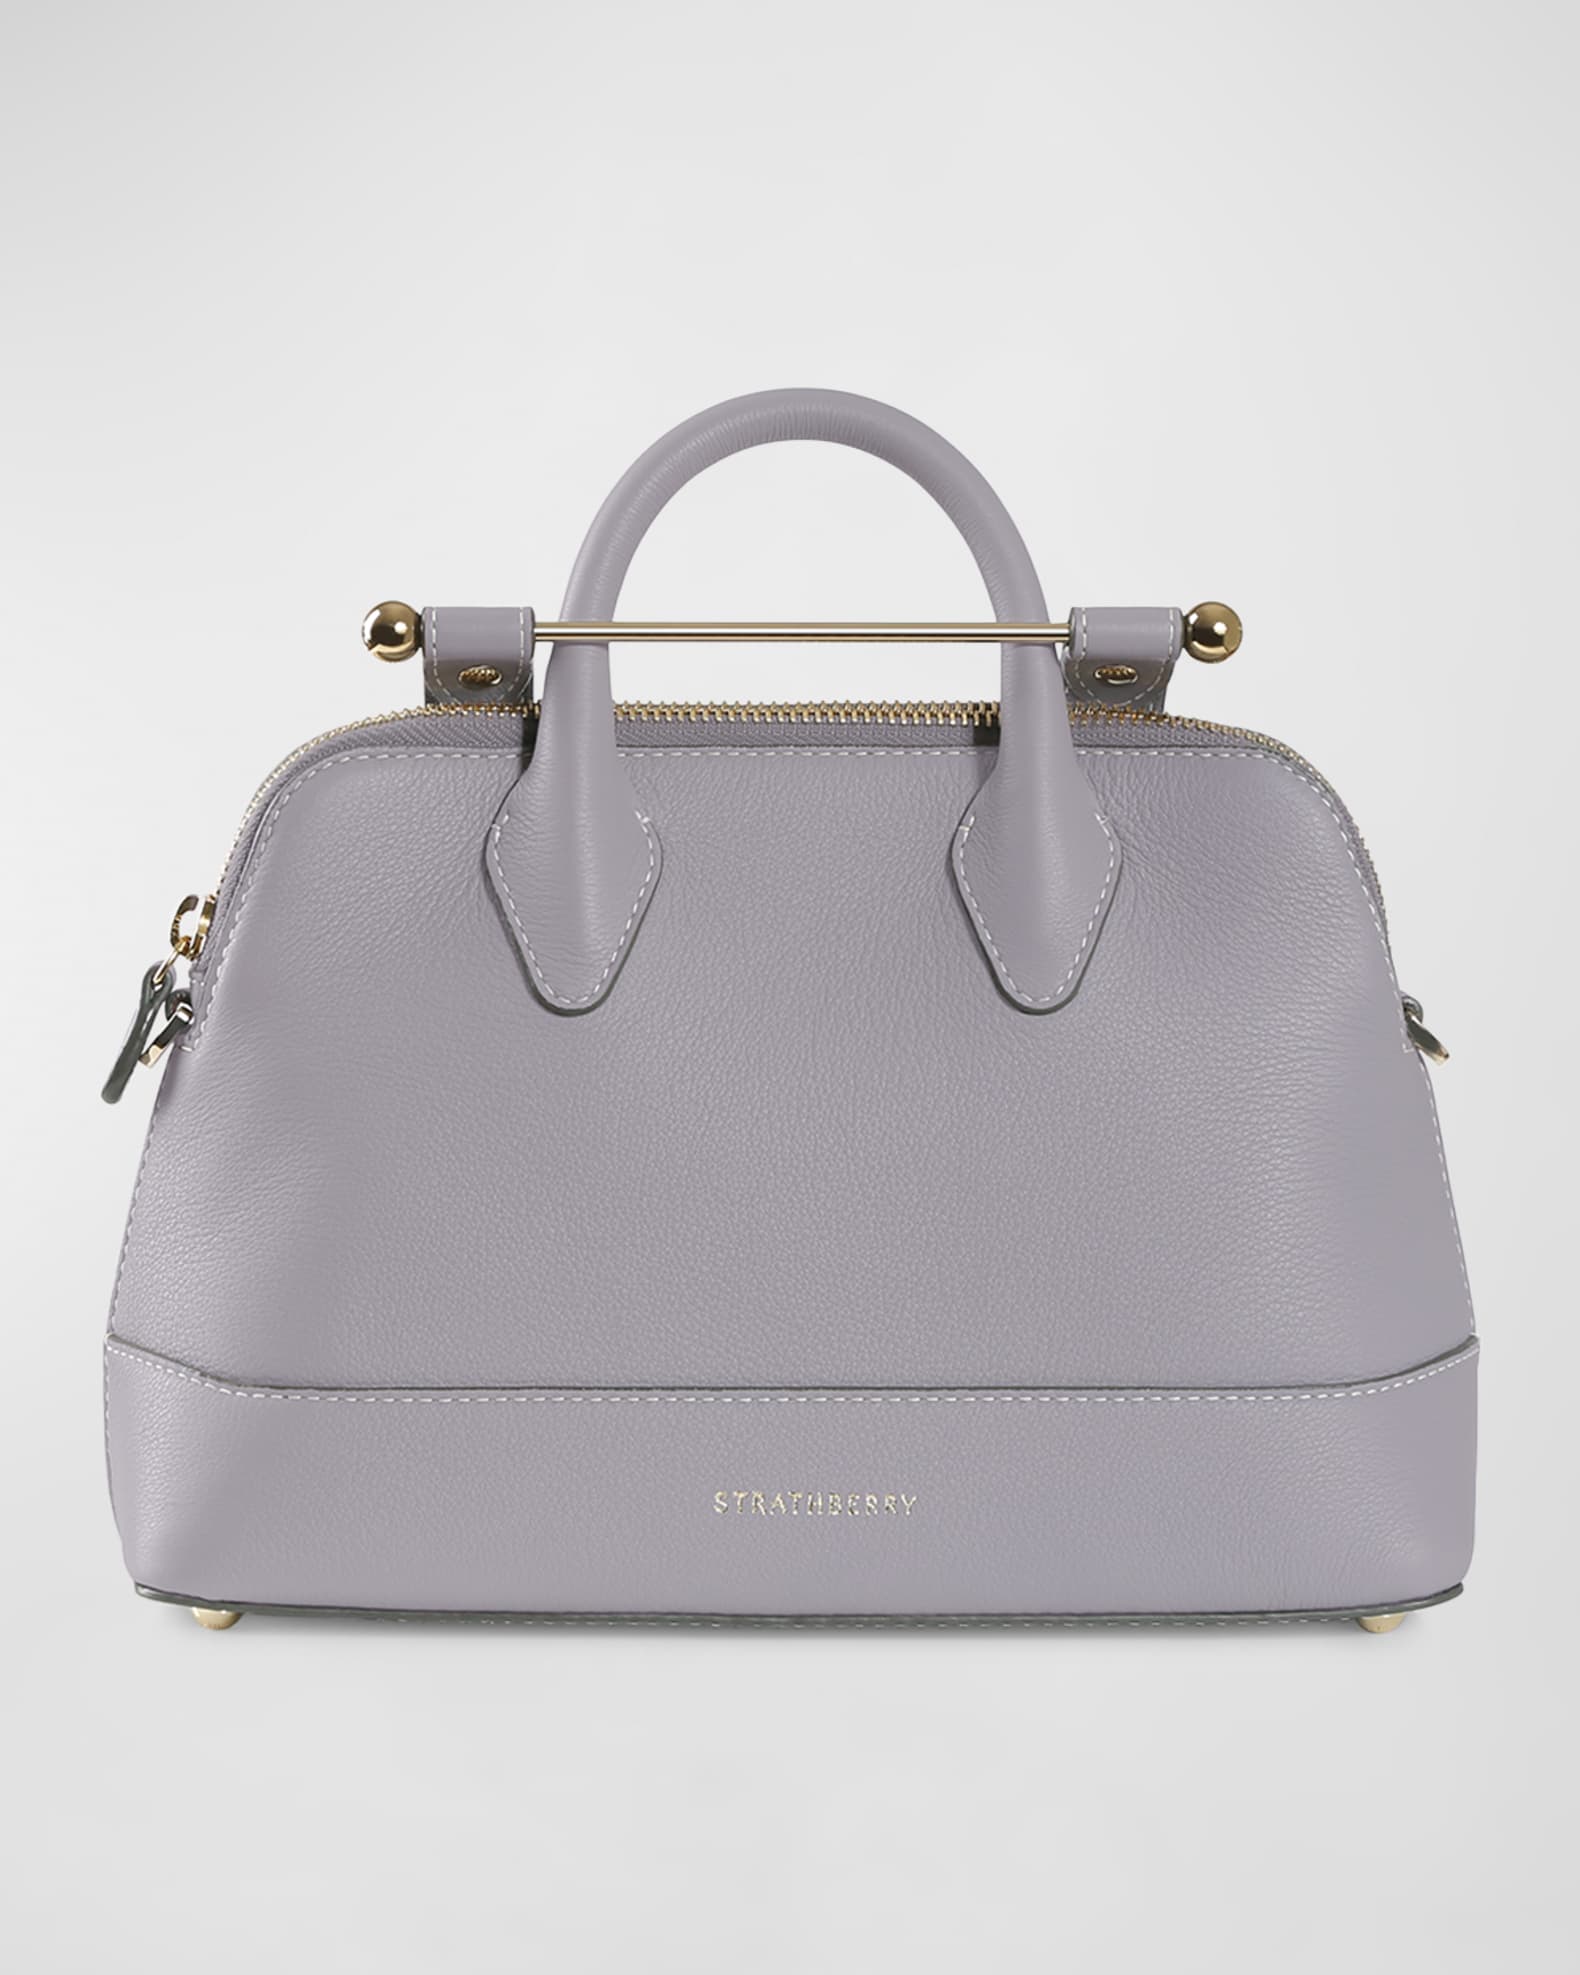 The Strathberry Midi Tote - Vanilla/Frost Grey with Grey Stitch